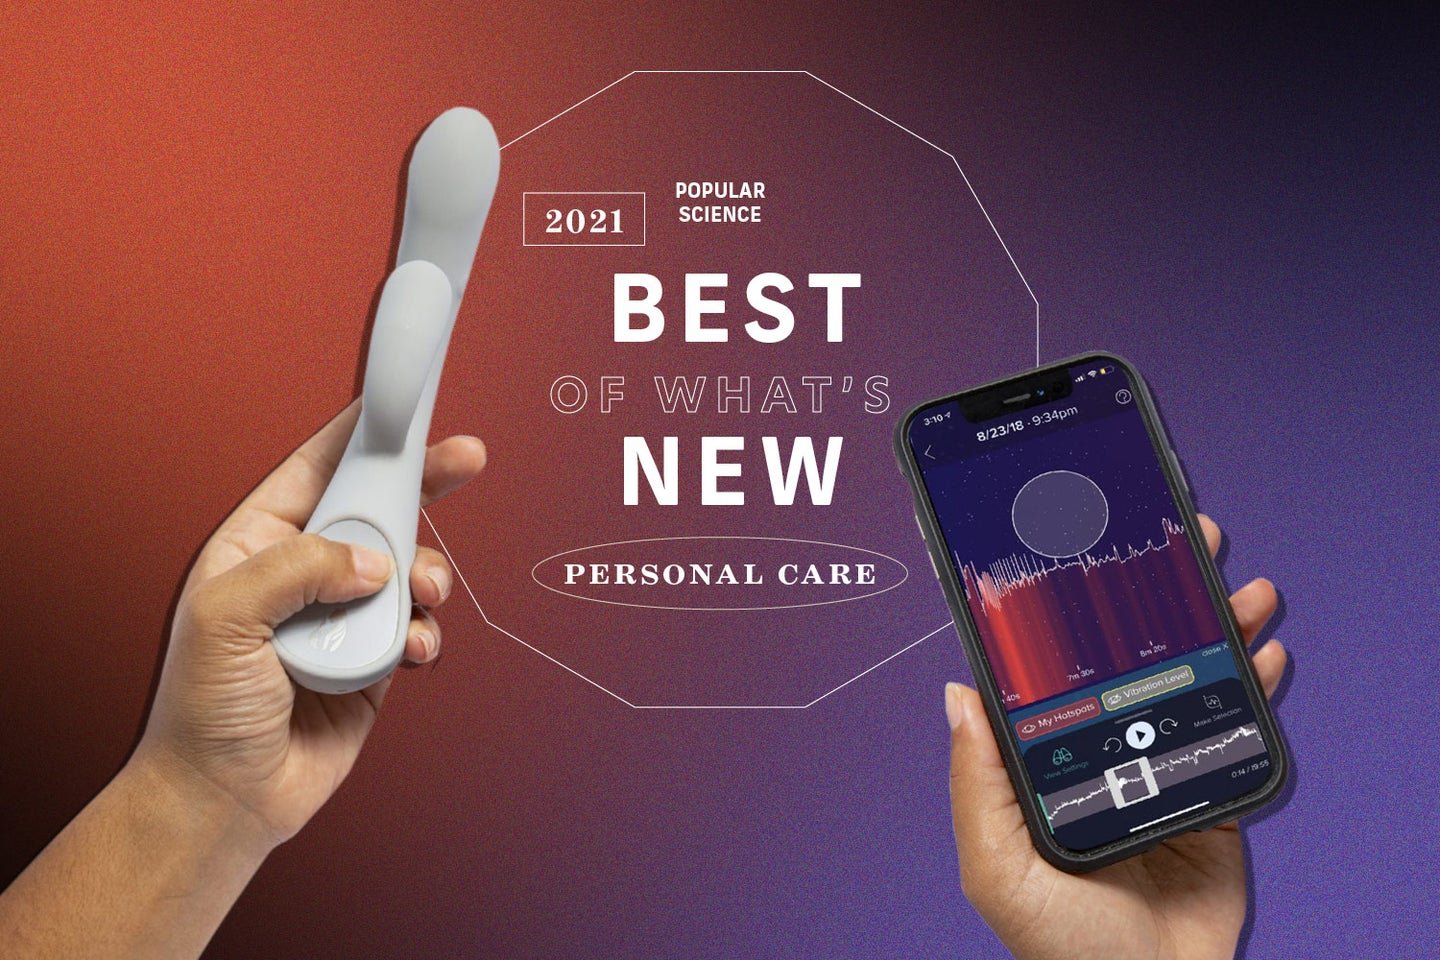 The most innovative personal care products of 2021